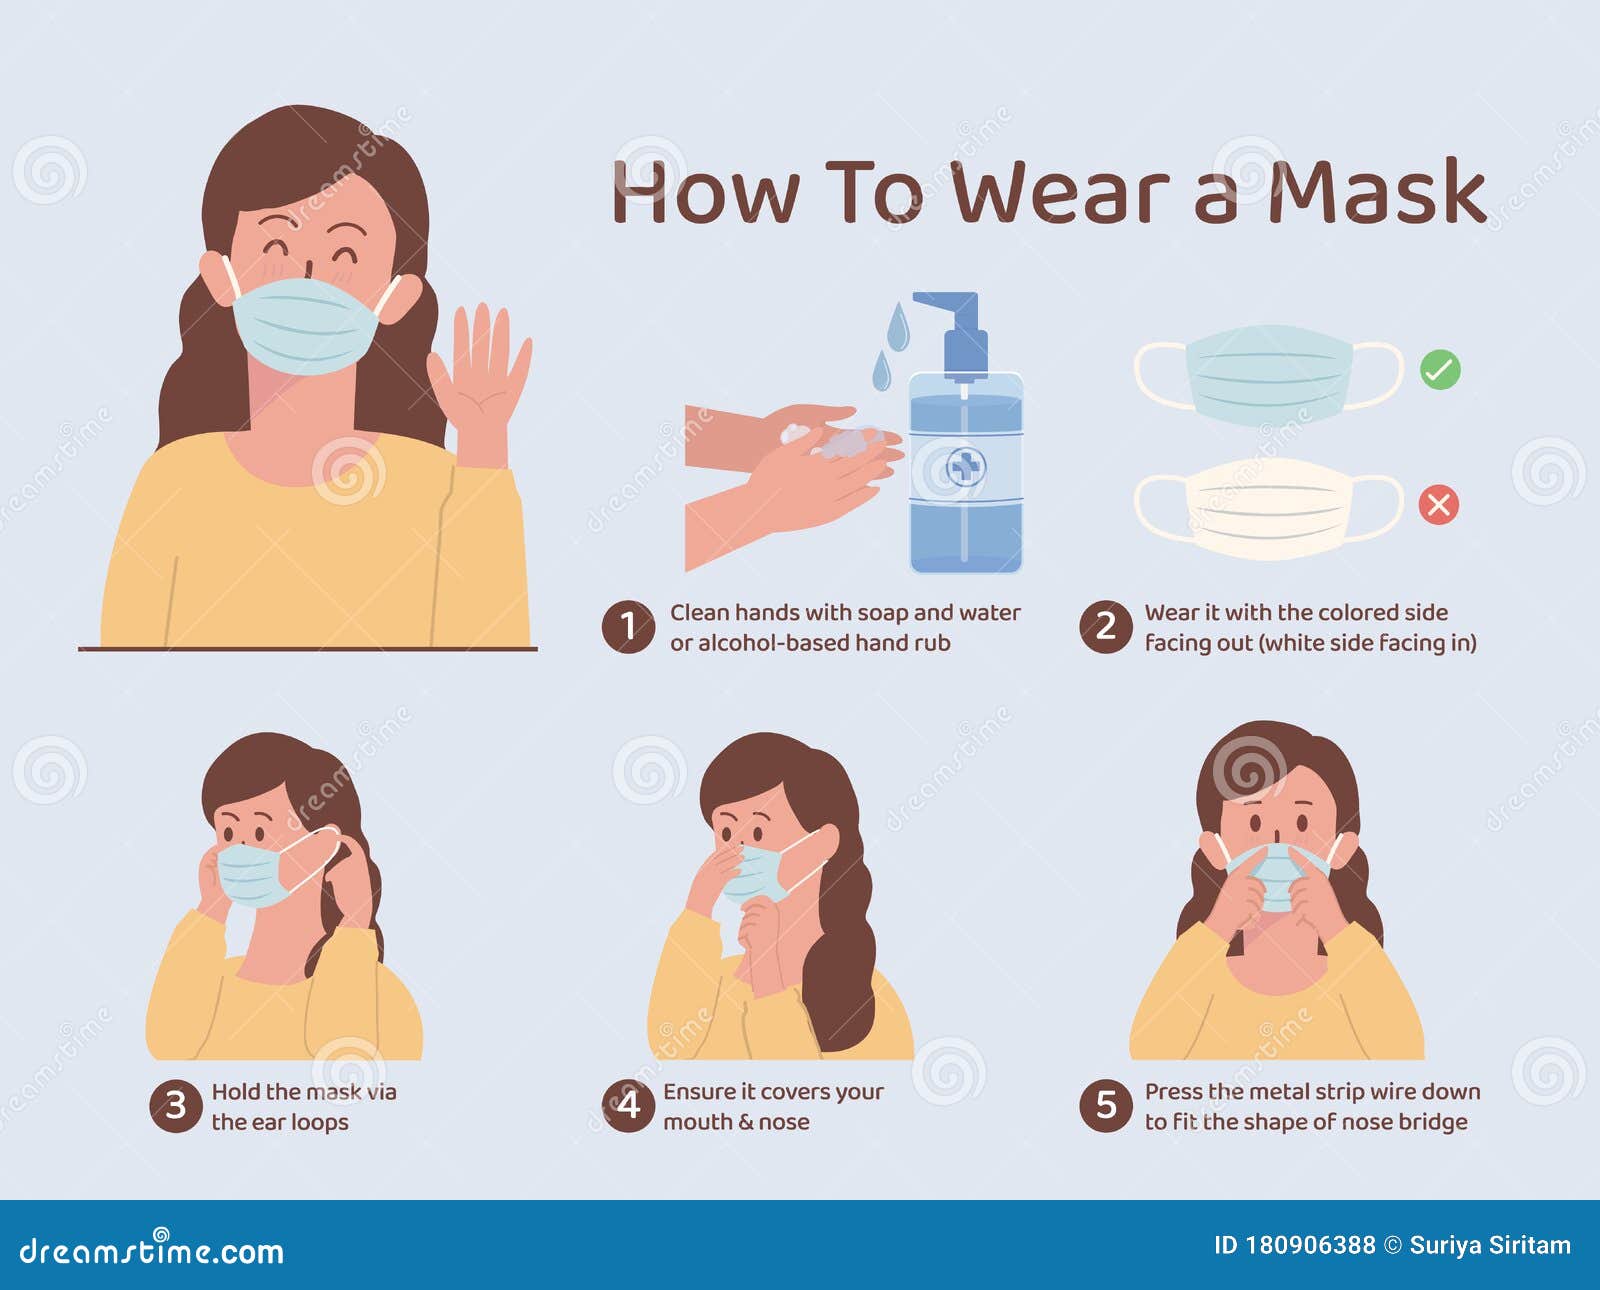 How To Wear a Mask for Prevent Virus and Bacteria. Illustration about ...